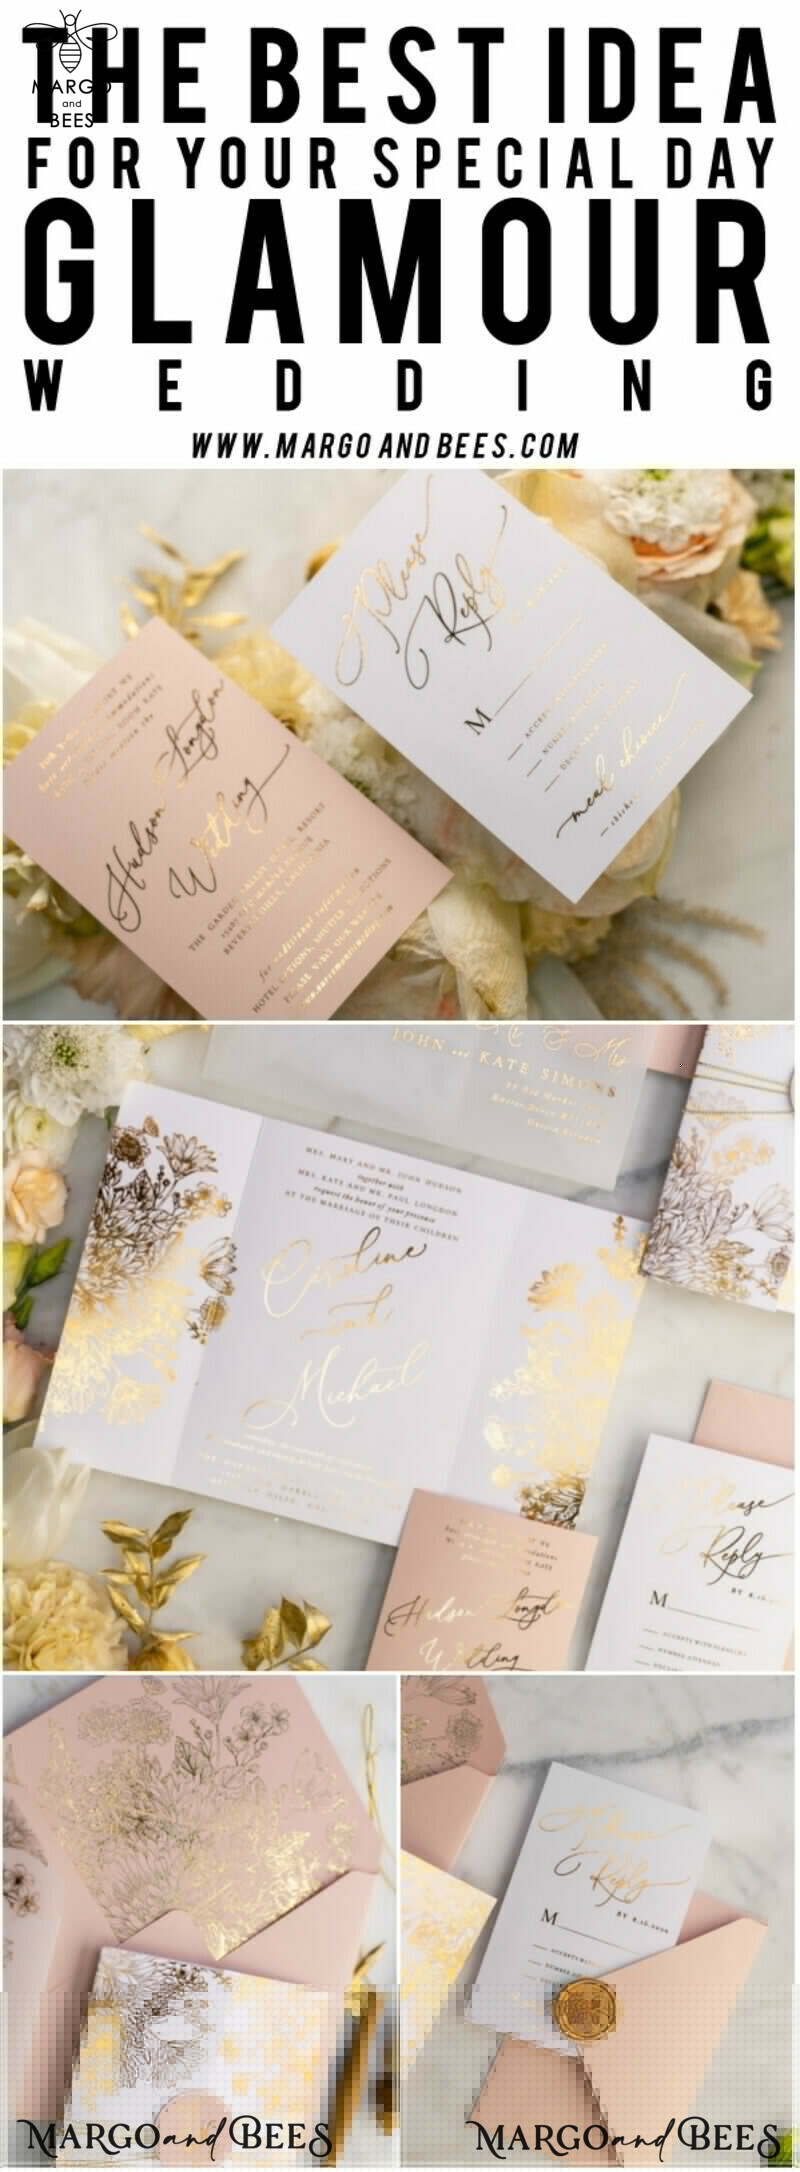 Elegant Arabic Golden Wedding Invitations with Glamour Gold Foil and Romantic Blush Pink, Exquisite Bespoke Indian Wedding Stationery-45